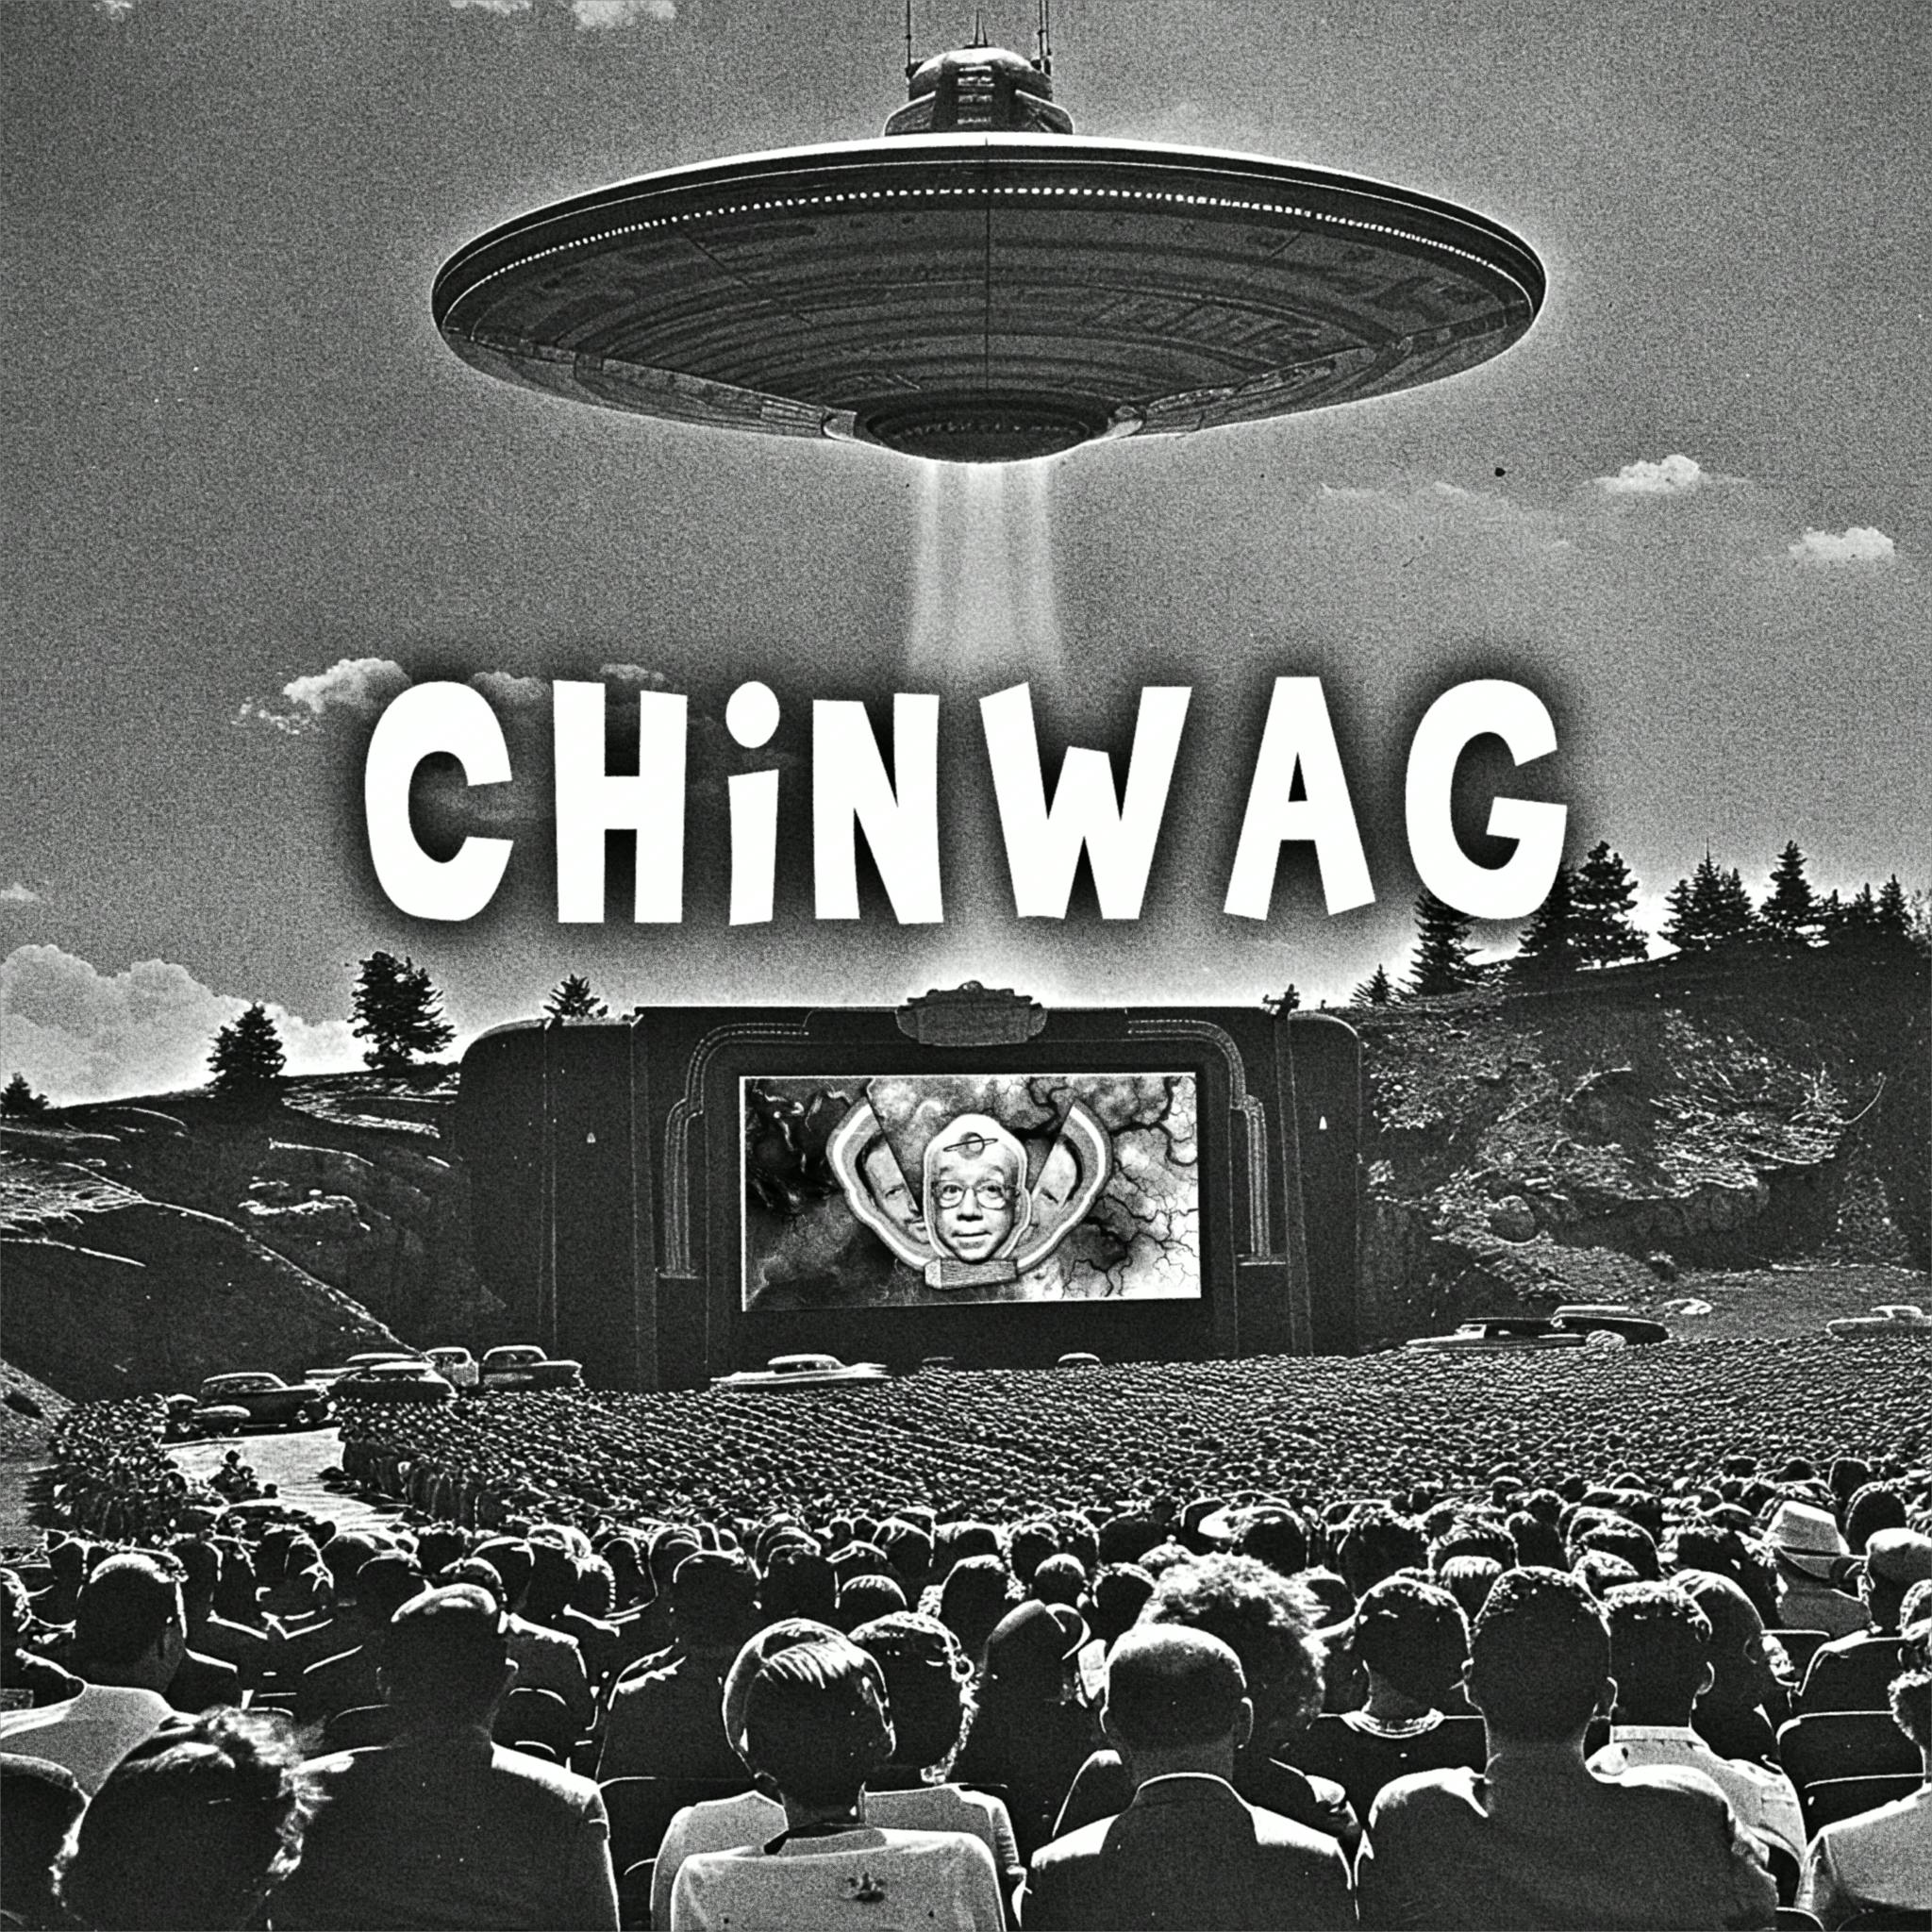 Chinwag Mailbag: Aliens at the Movies & Theories on JFK